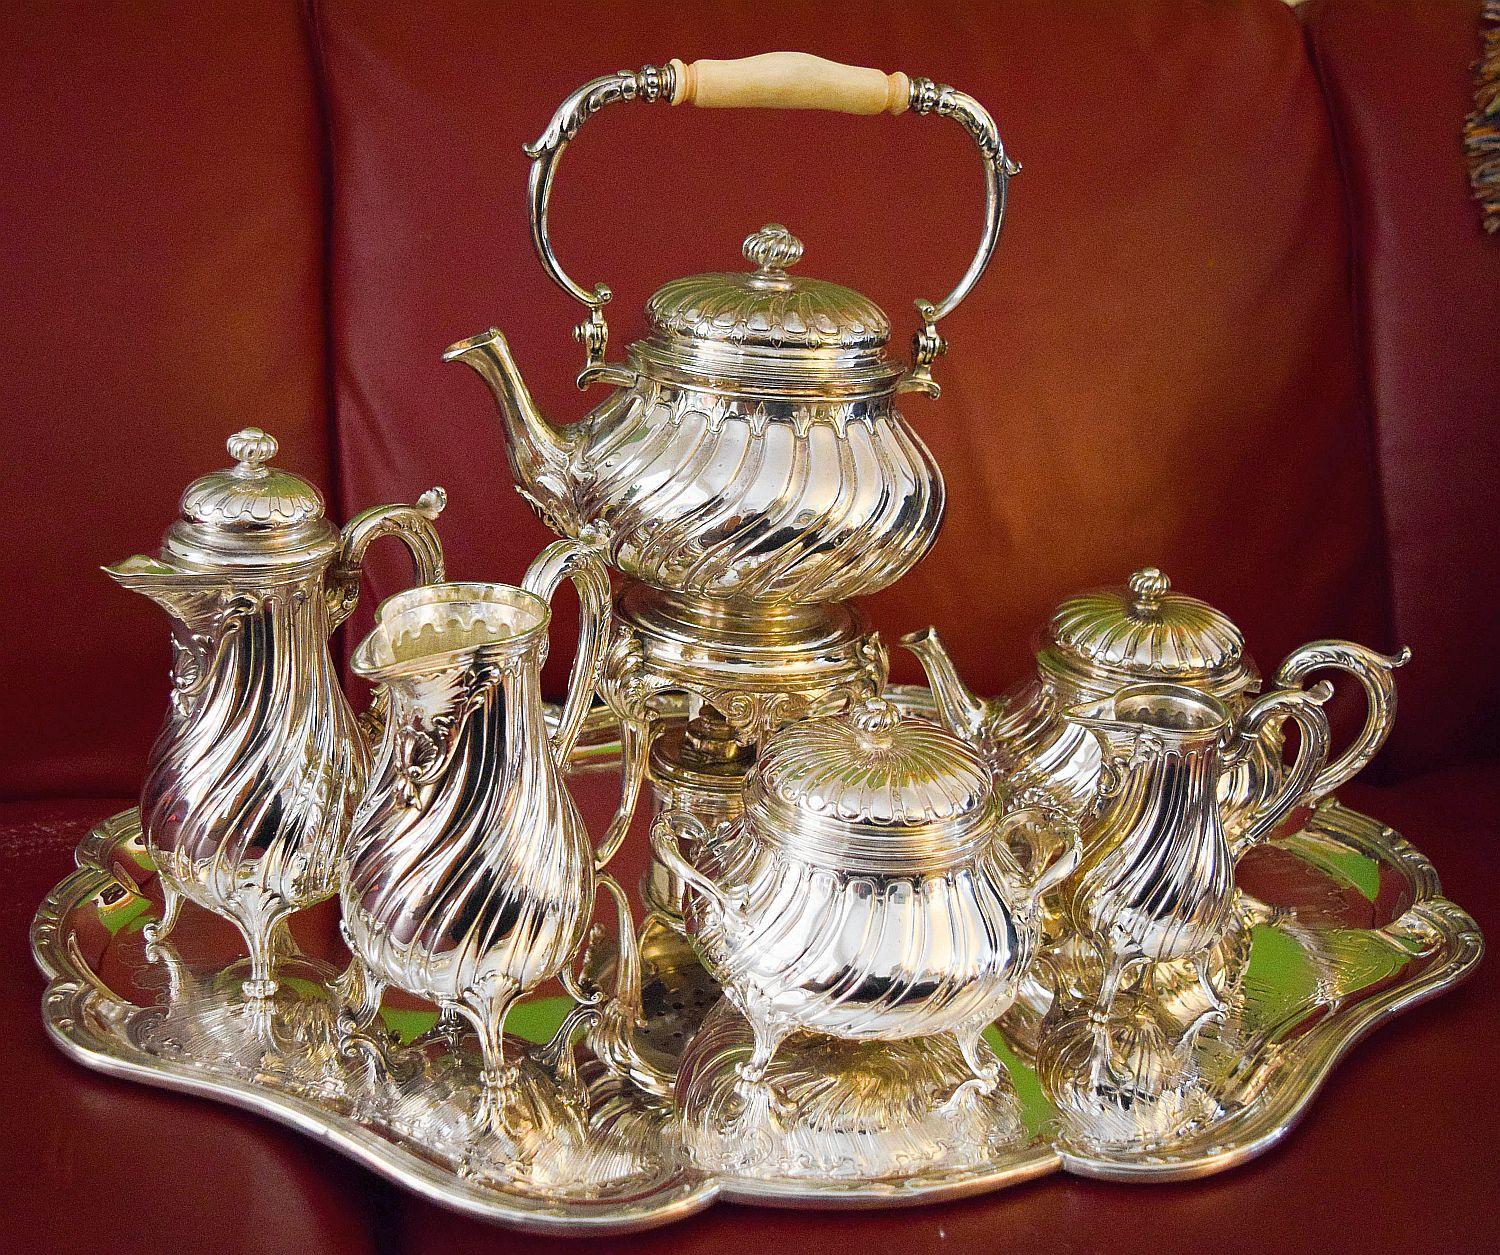 Christofle Museum quality 7 piece tea and coffee set silver plated
French Christofle Paris Elegant
This amazing tea set dates back to 1890's
It is really is very difficult to find these Christofle tea sets all complete nearly in this condition
150